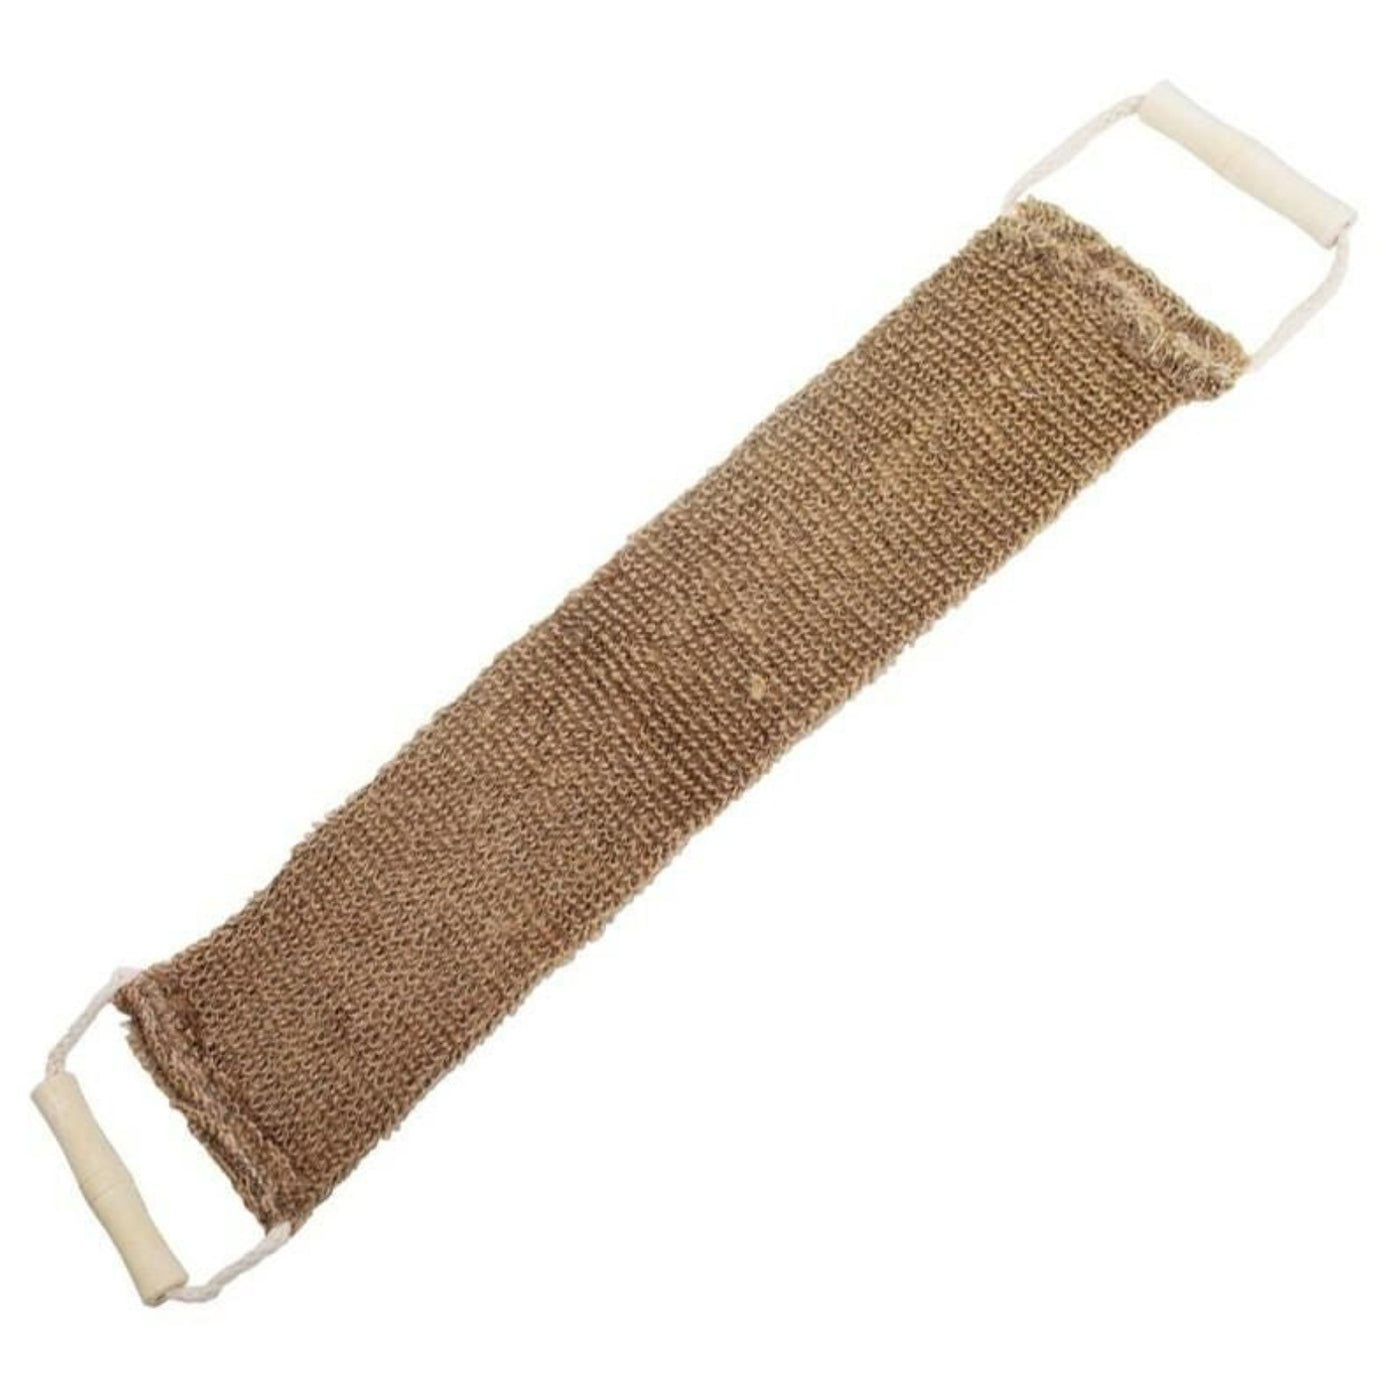 Luxurious Jute Mix Back Scrub With Wooden Handles.